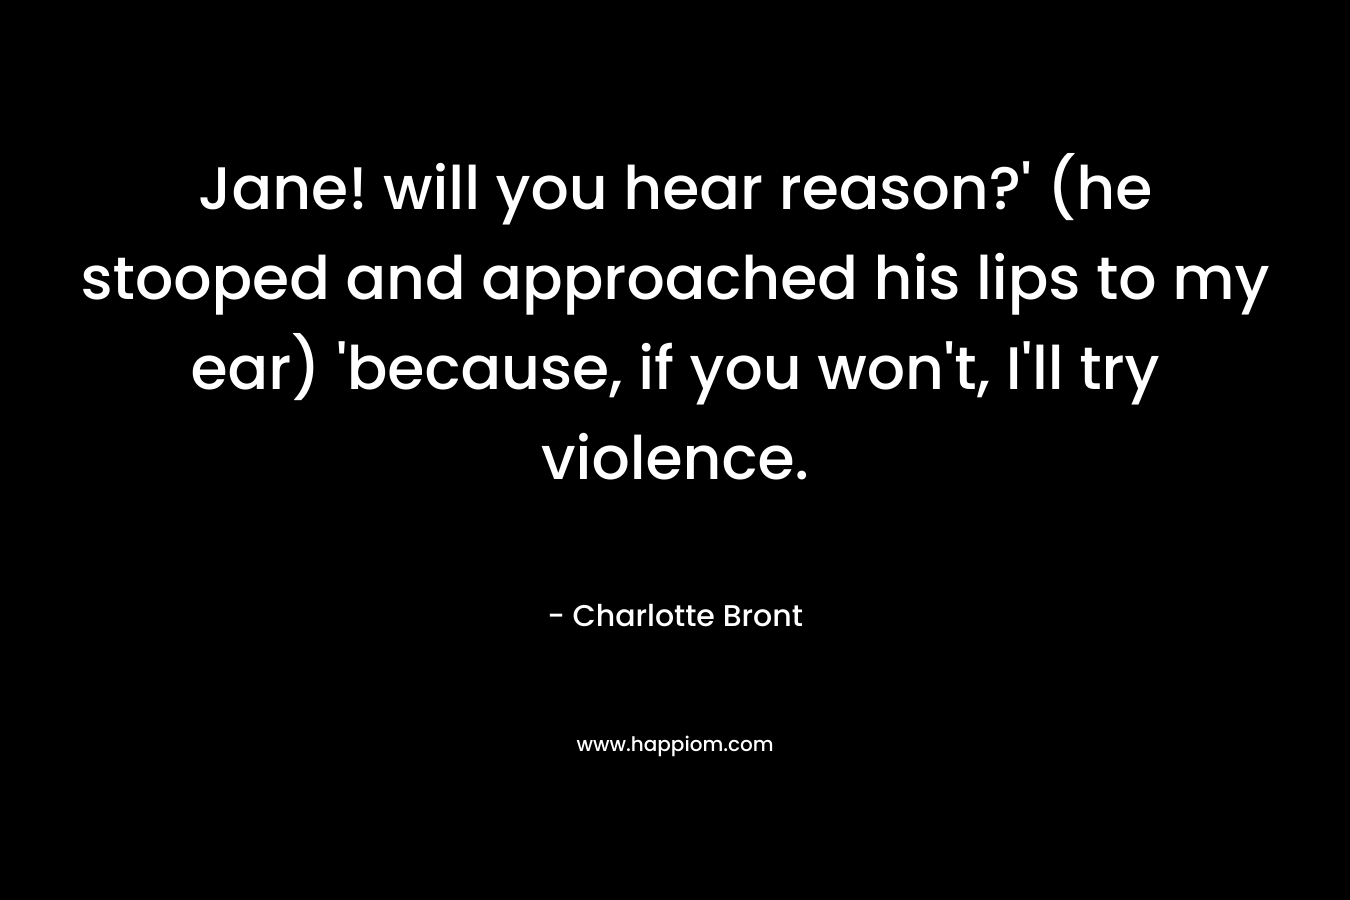 Jane! will you hear reason?' (he stooped and approached his lips to my ear) 'because, if you won't, I'll try violence.